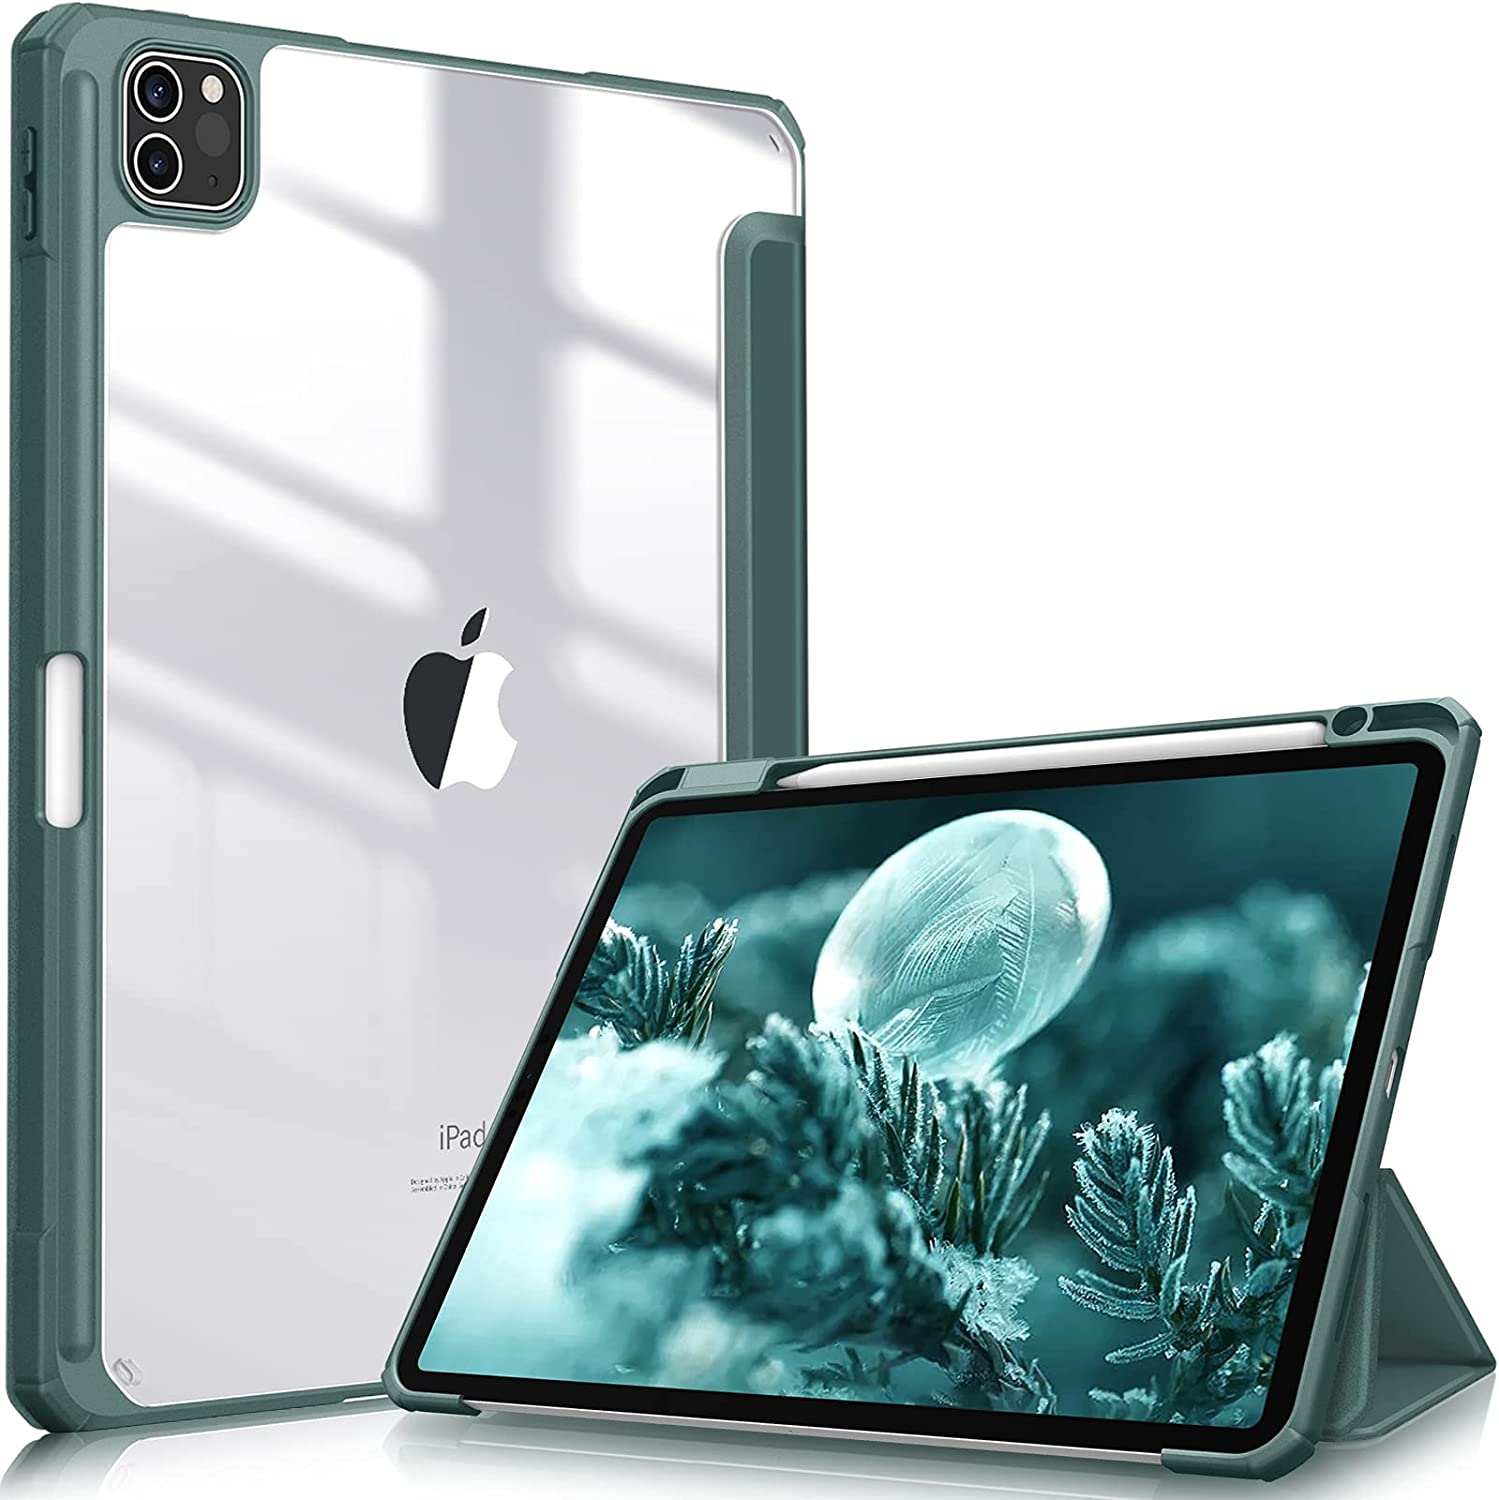 F Hybrid Slim Case for iPad Pro 11-inch (4th / 3rd Generation) 2022/2021 - [Built-in Pencil Holder] Shockproof Cover w/Clear Transparent Back Shell, Also Fit iPad Pro 11 2nd Gen, M